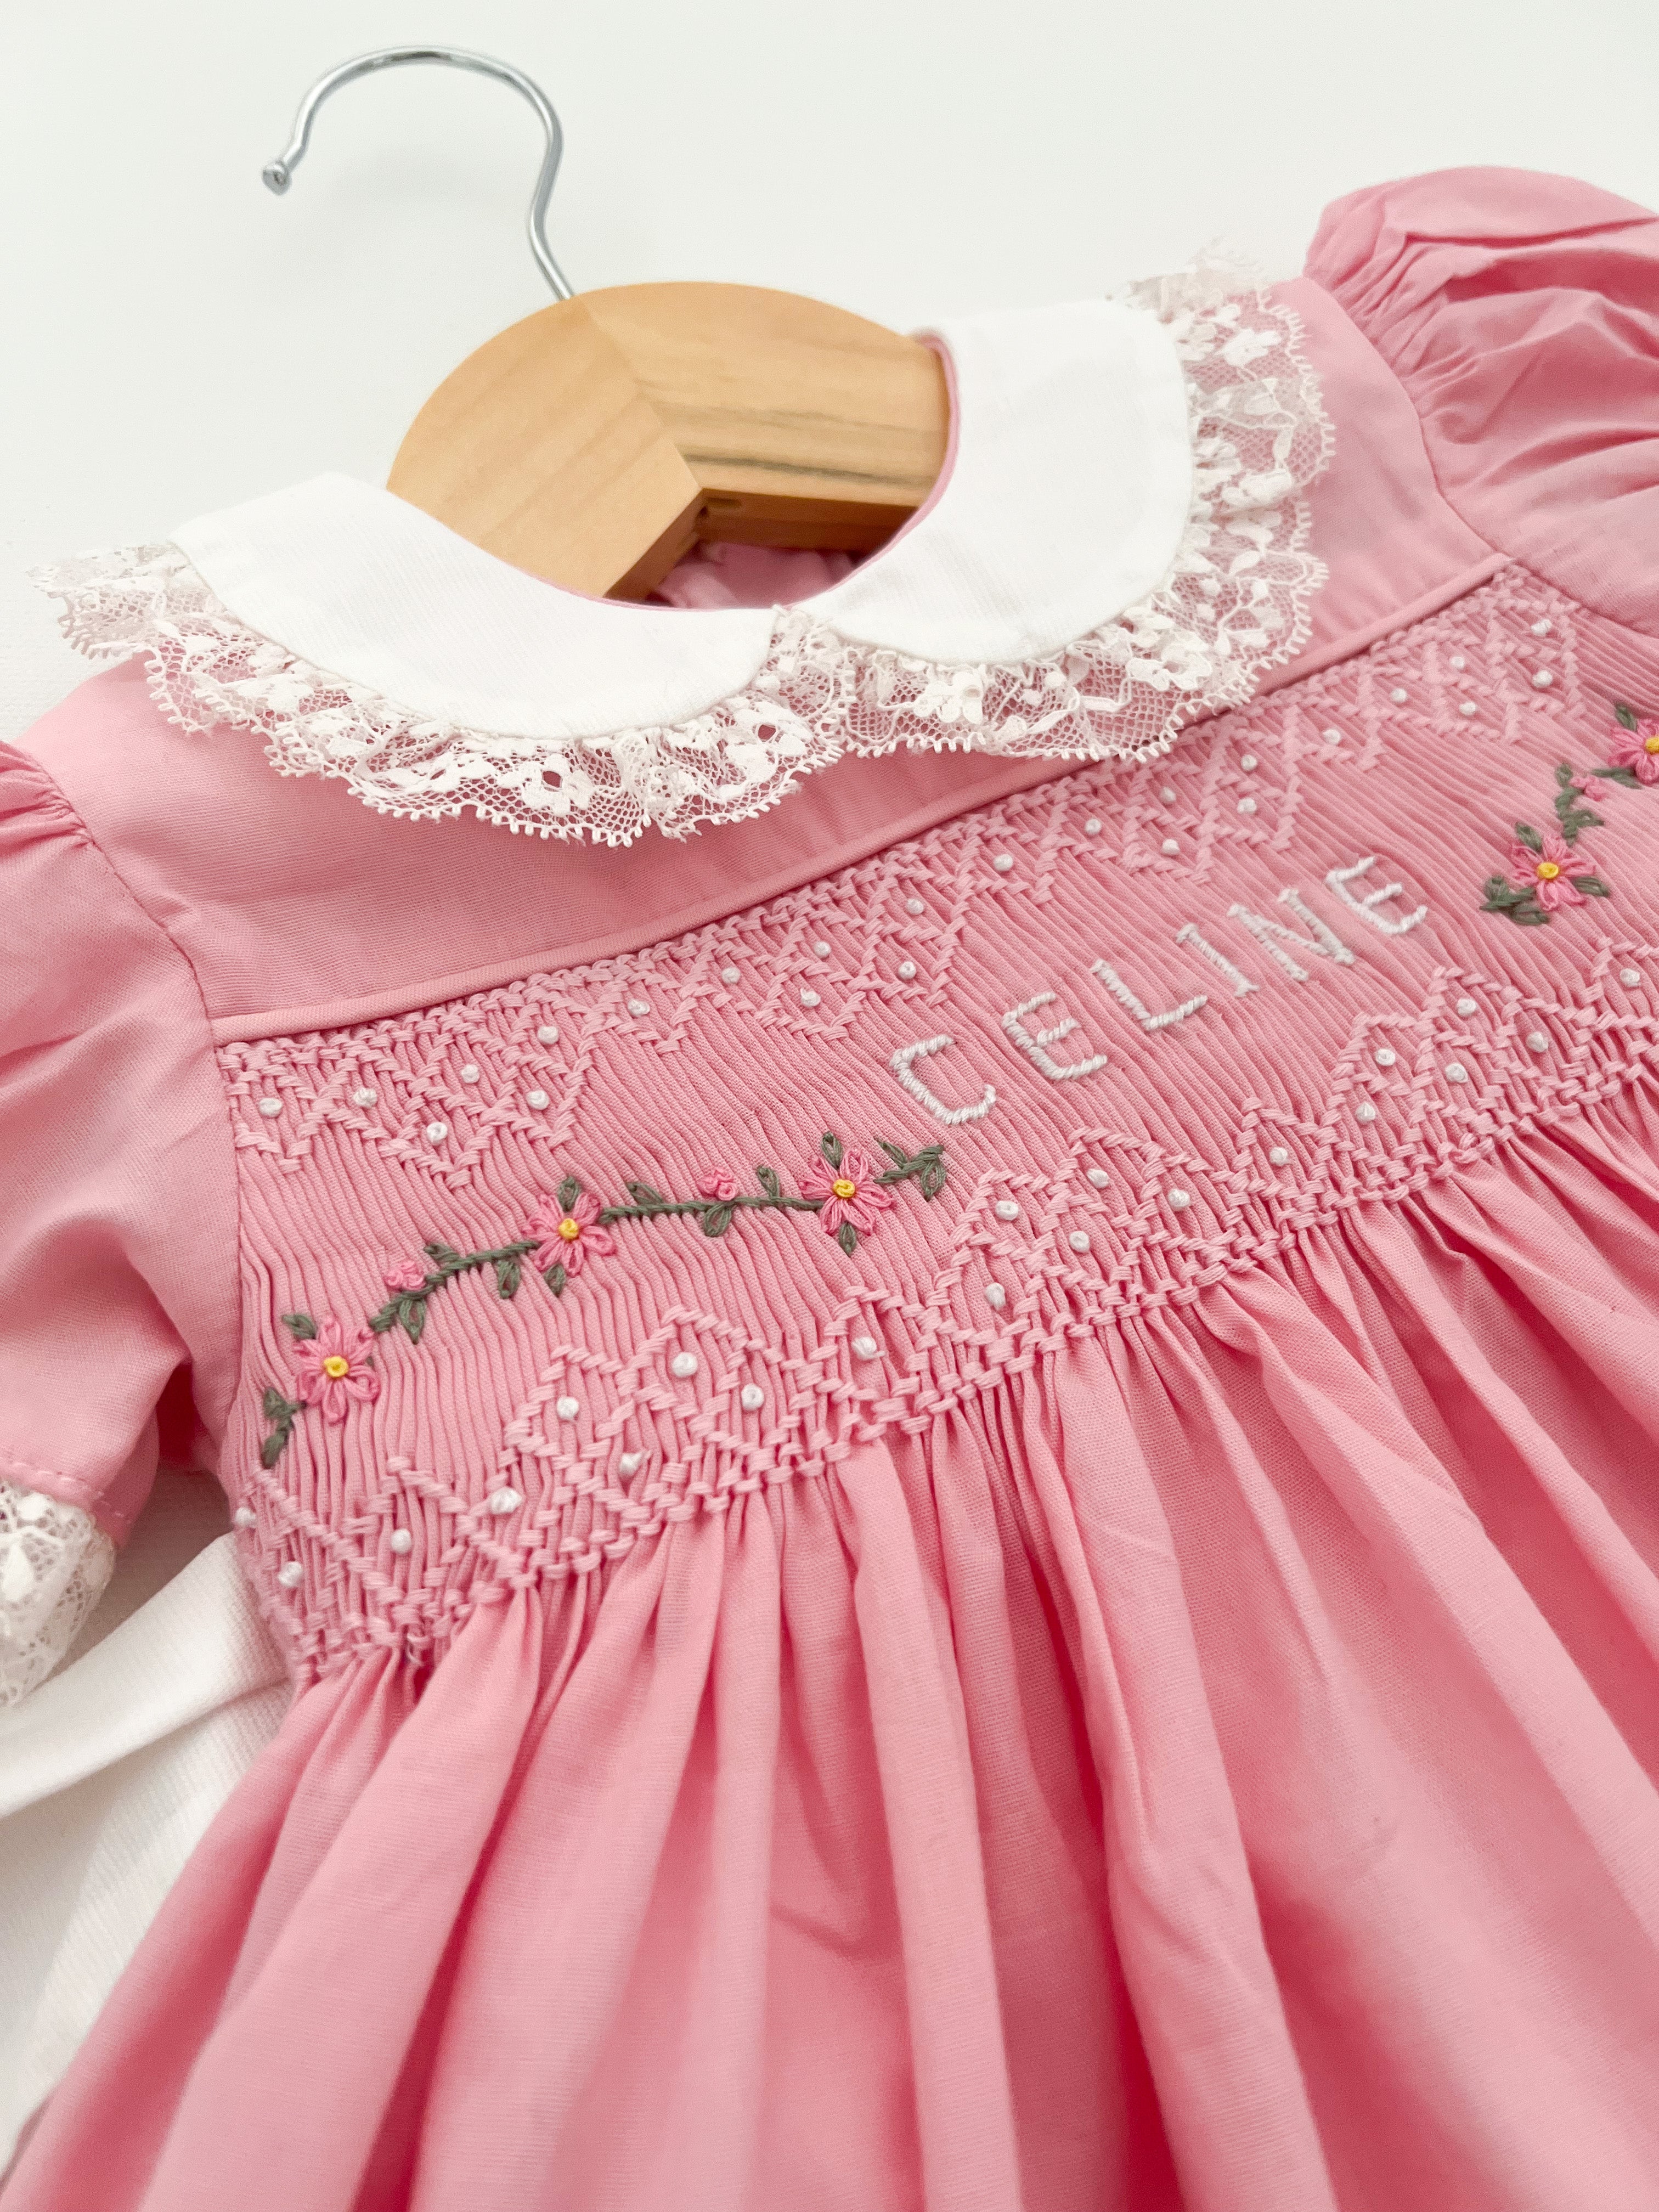 The customizable hand embroidered ELISABET dress. (MADE-TO-ORDER, 4-6 weeks)